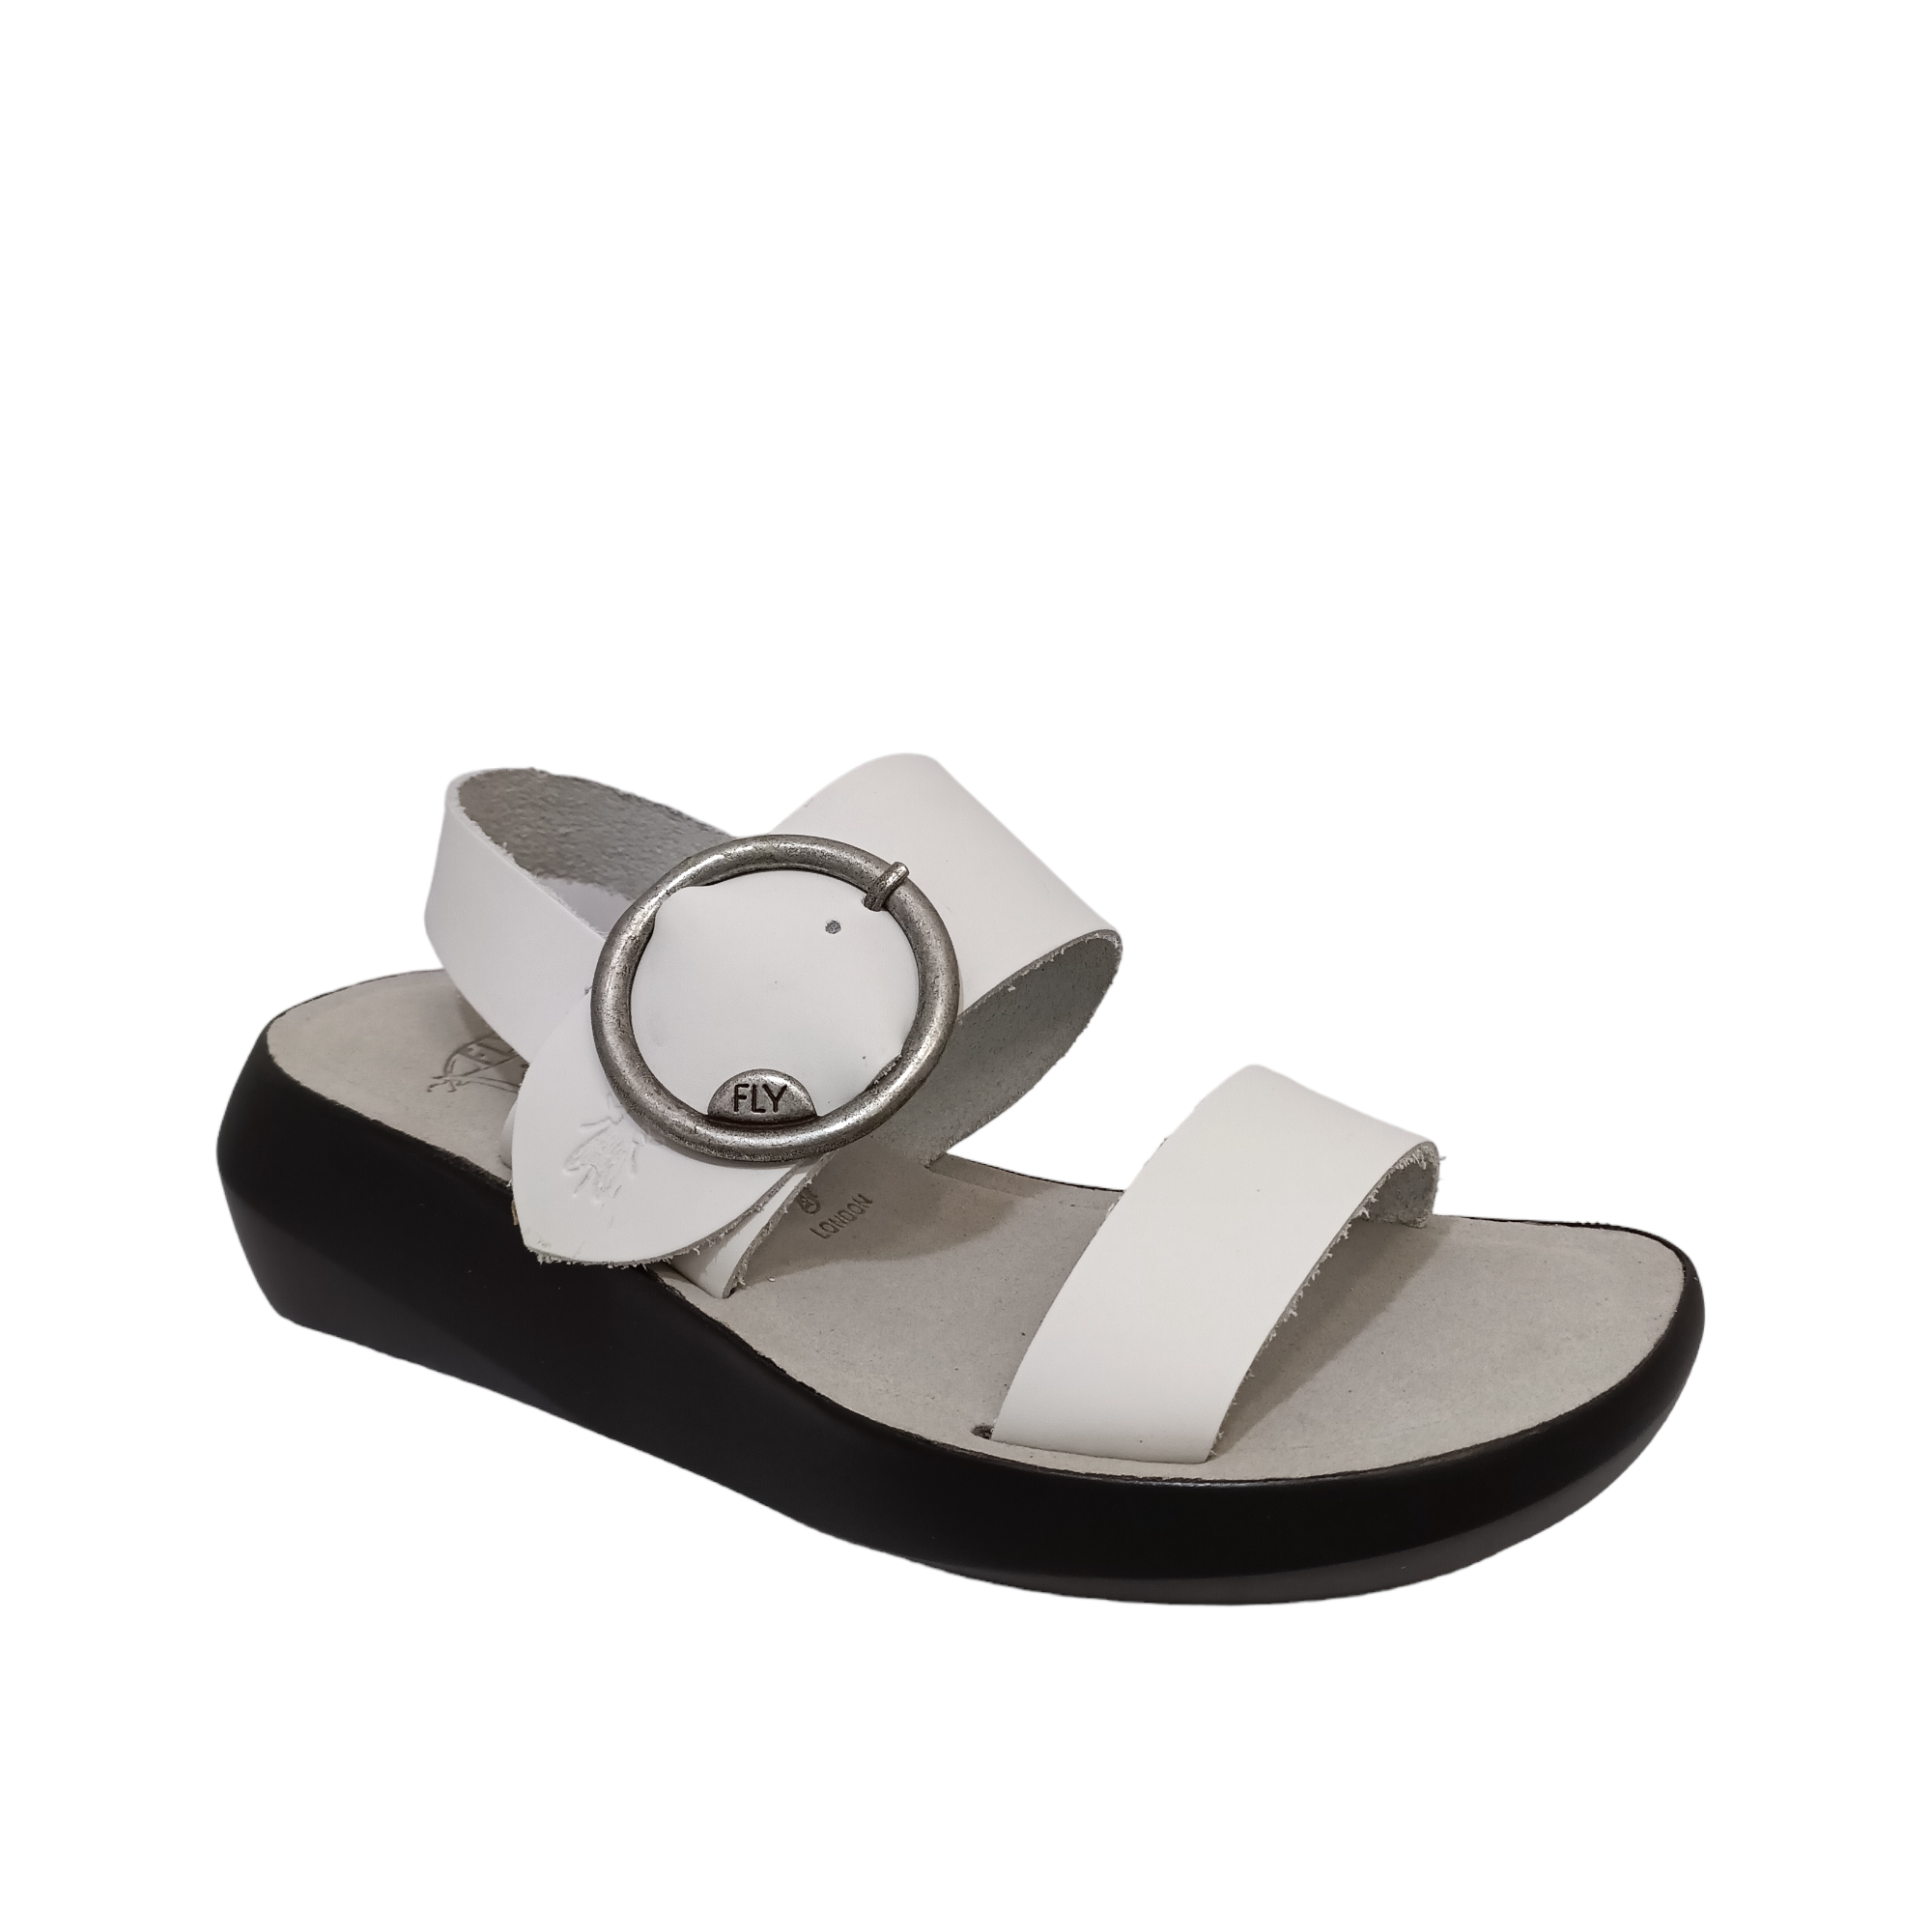 Fly London Sandals 6 FOR SALE! - PicClick UK